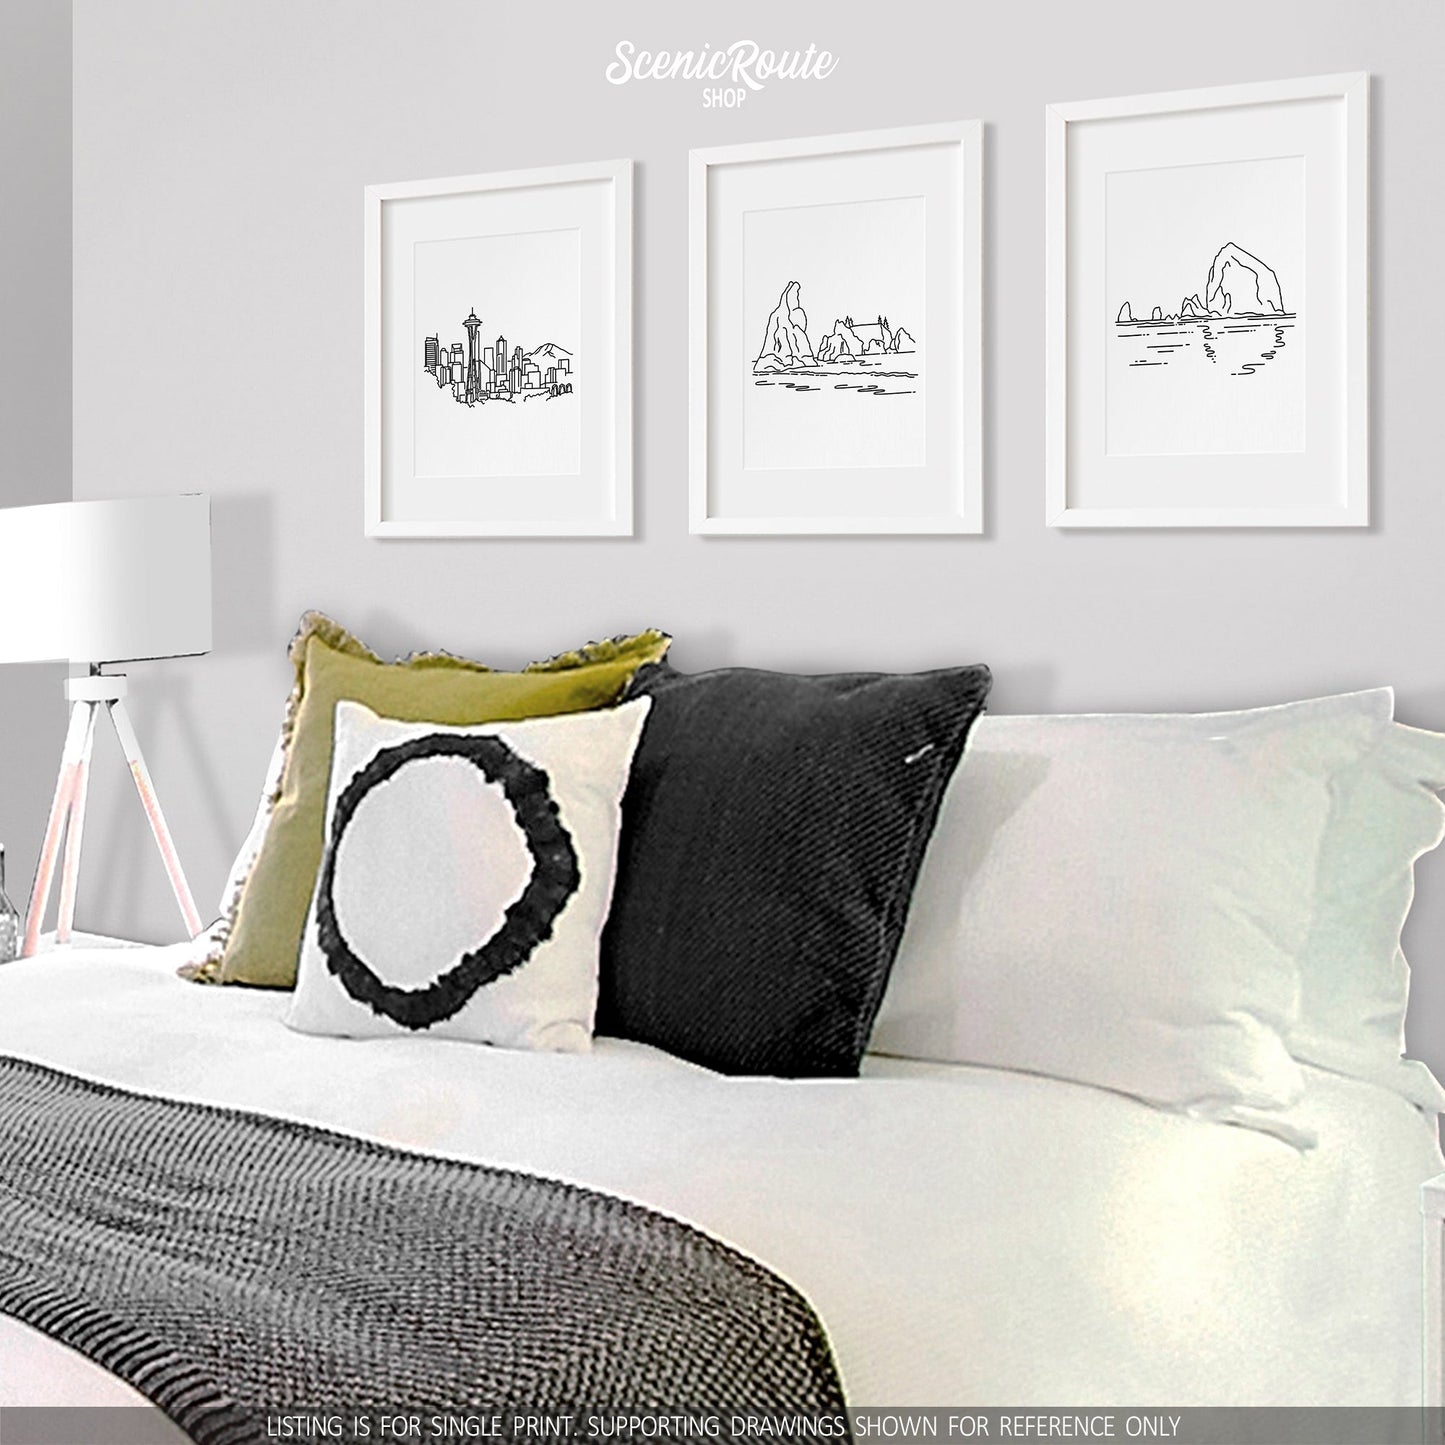 A group of three framed drawings on a white wall above a bed. The line art drawings include the Seattle Skyline, Olympic National Park, and Haystack Rock